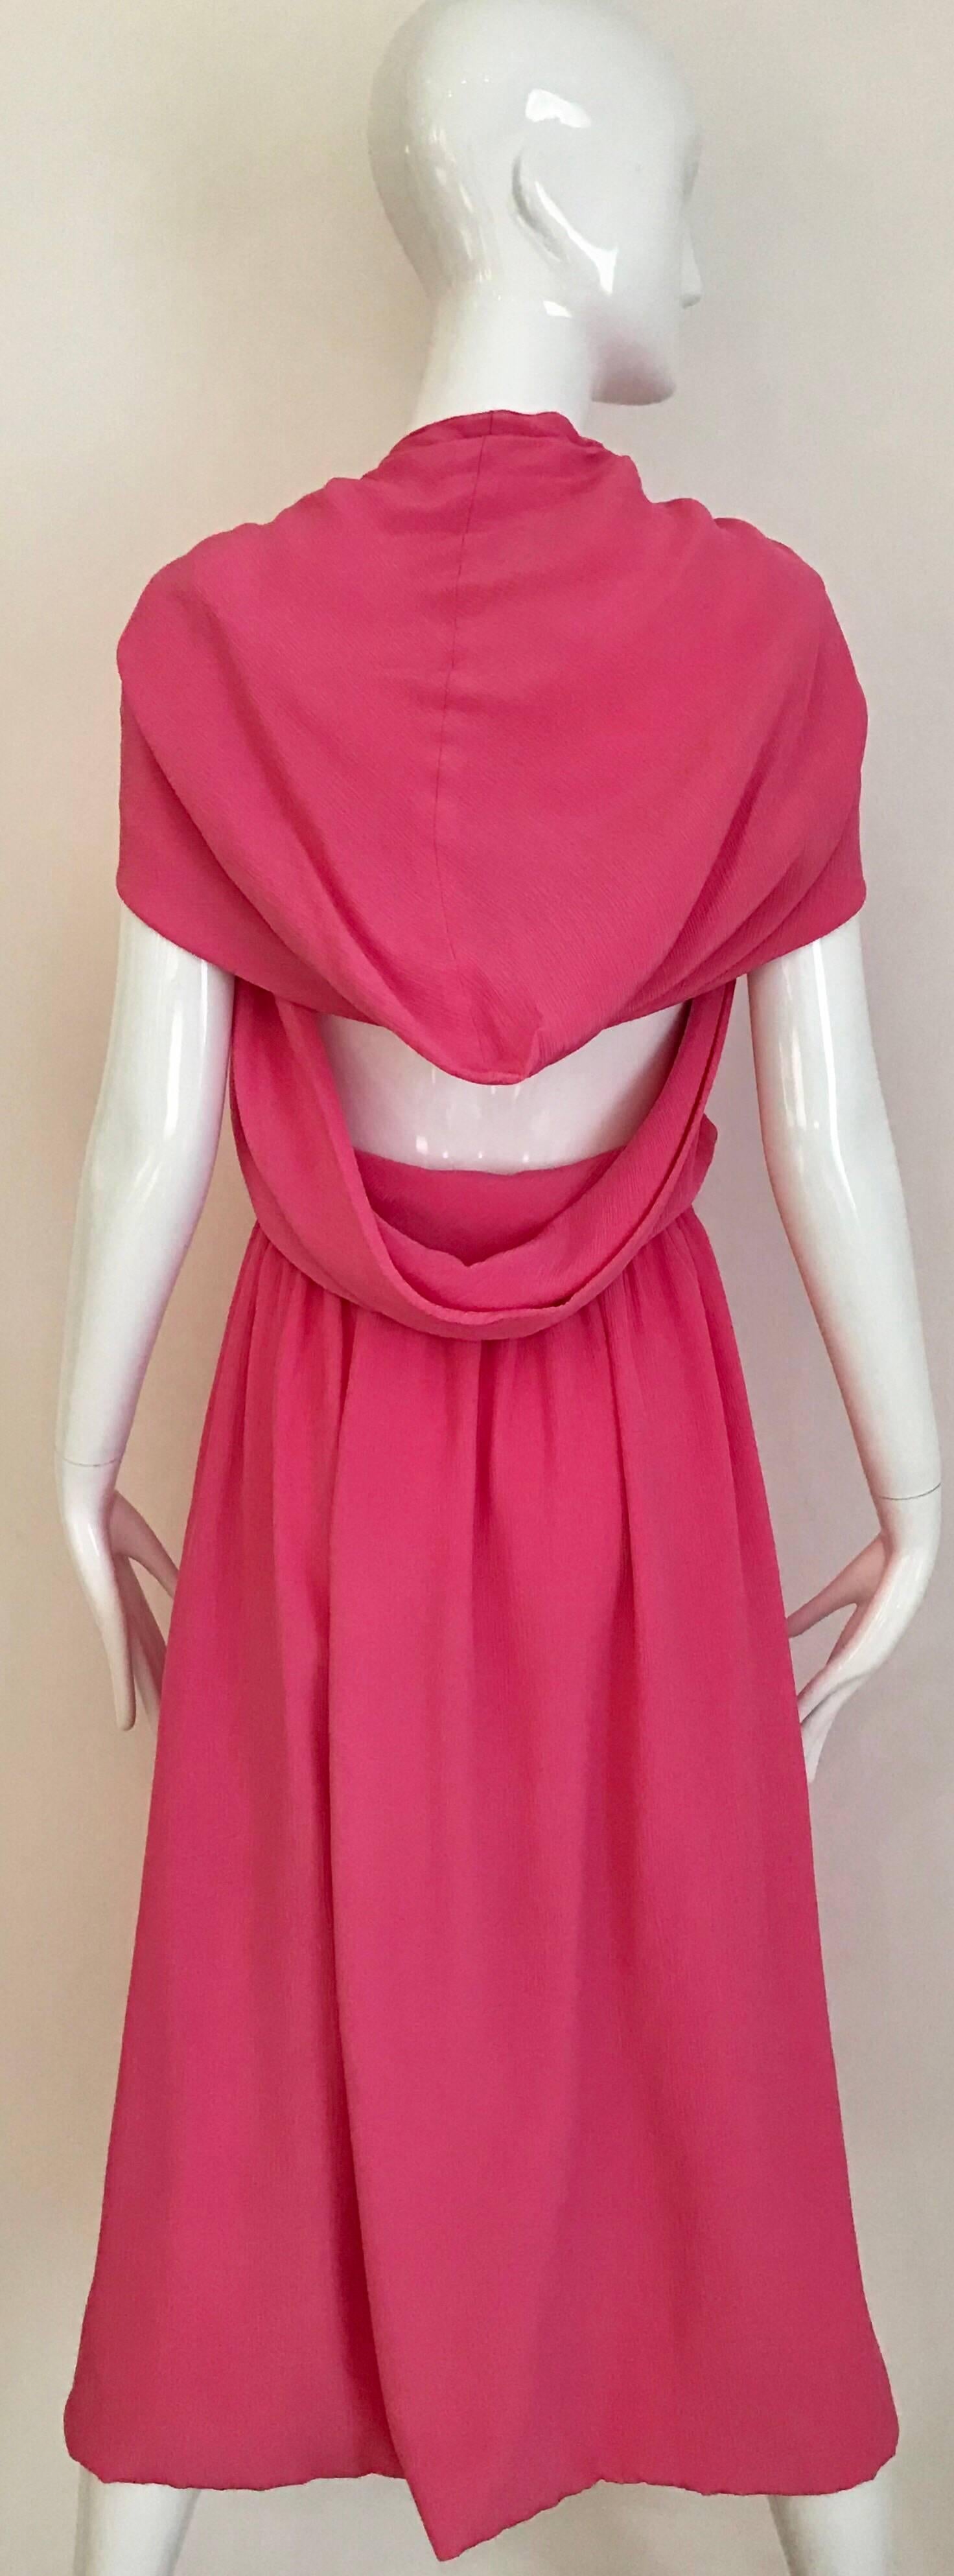 1970s Bright pink crepe de chine sexy and chic dress with v neck and large hood.
Bust: 36 inches/ Waist: 24 inches